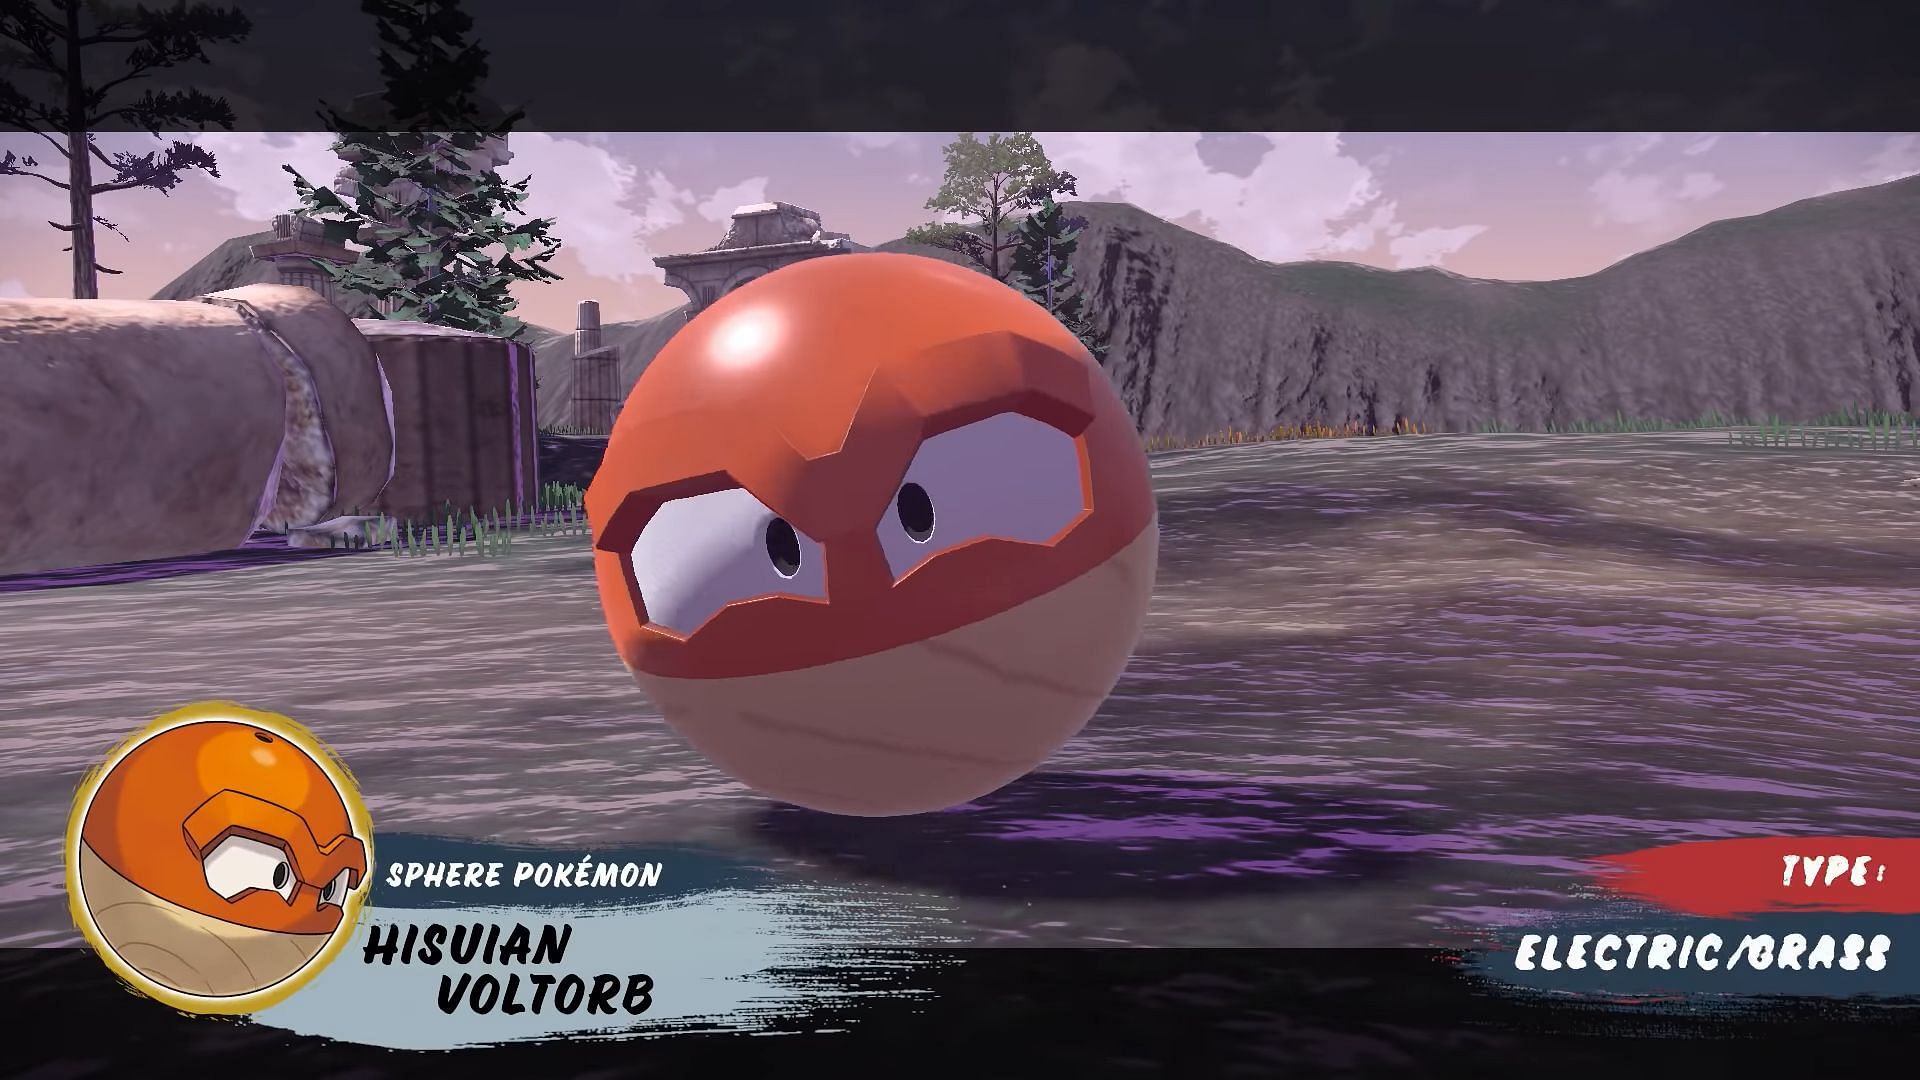 Hisuian Voltorb is Grass-type as well as Electric-type (Image via Game Freak)